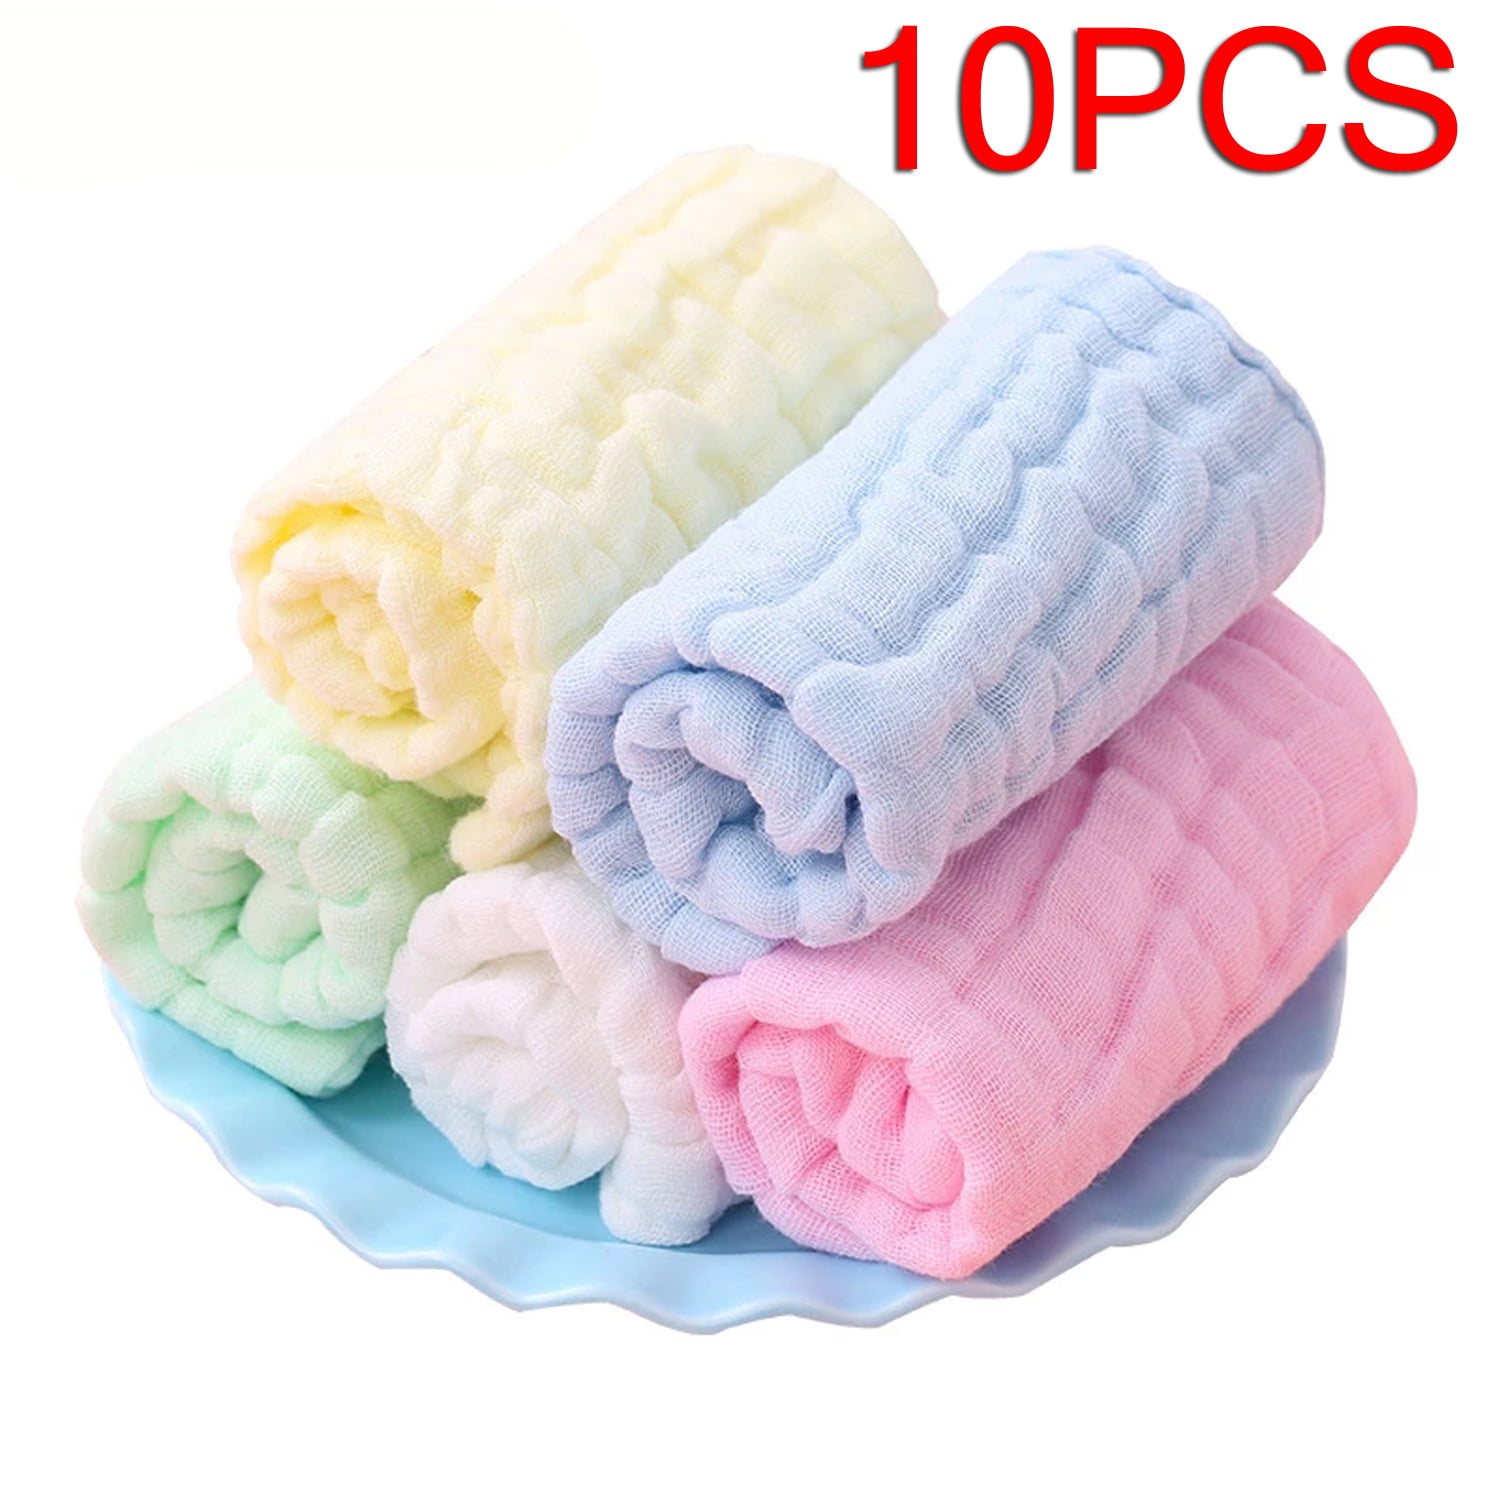 100% cotton double layer muslin gauze use throw blanket or bath sheet quick drying relaxing and comfortable handmade gift Muslin Sheet